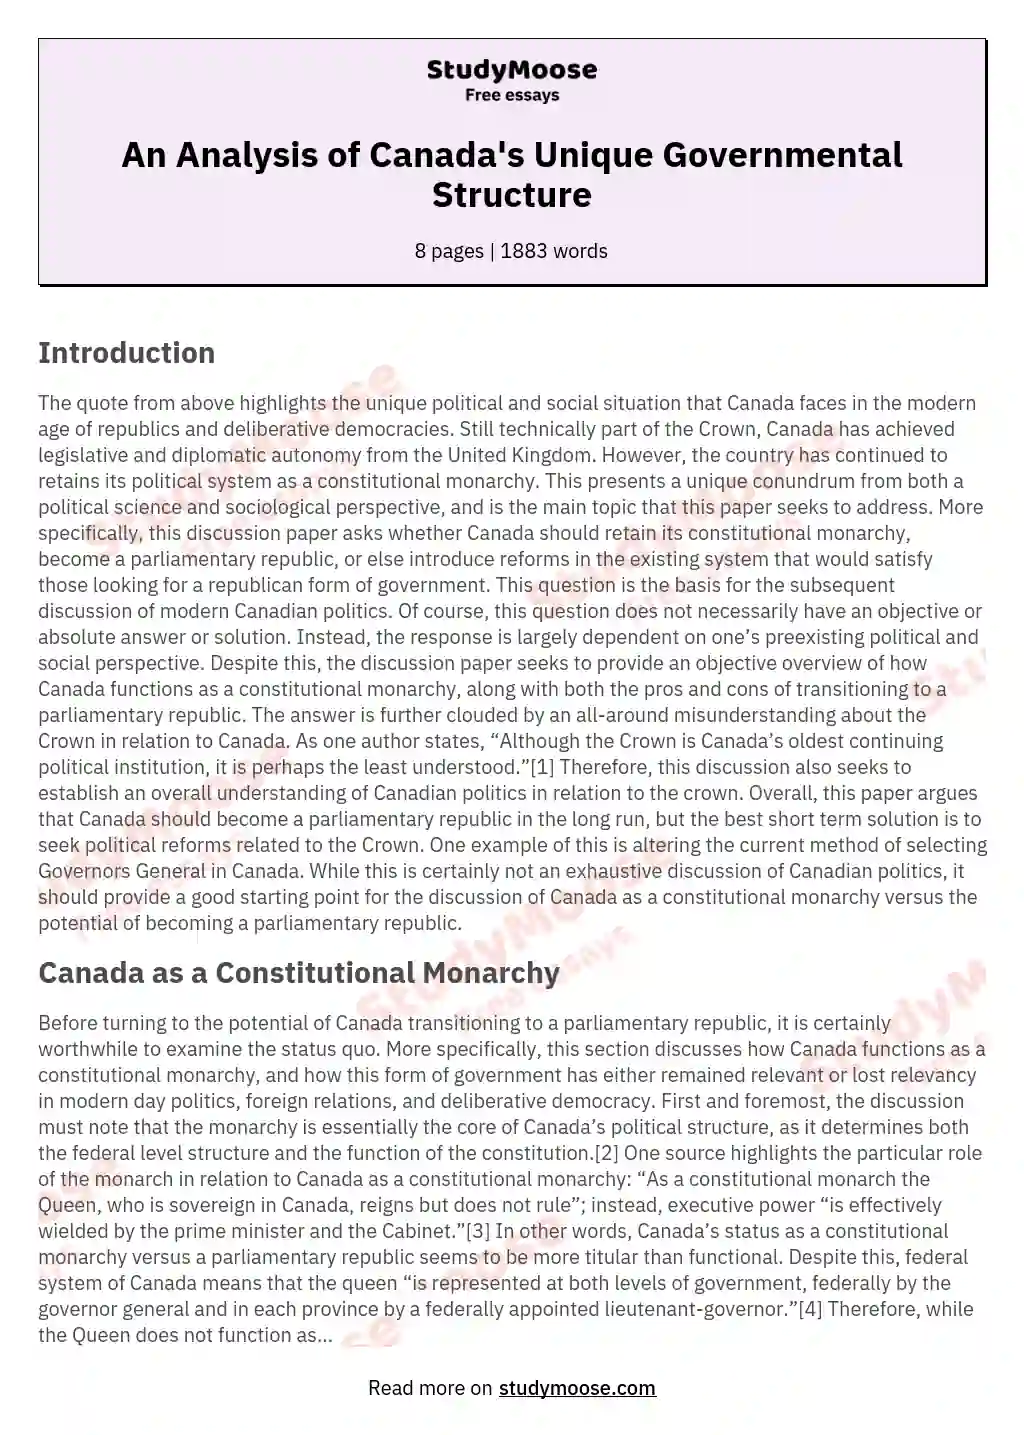 An Analysis of Canada's Unique Governmental Structure essay